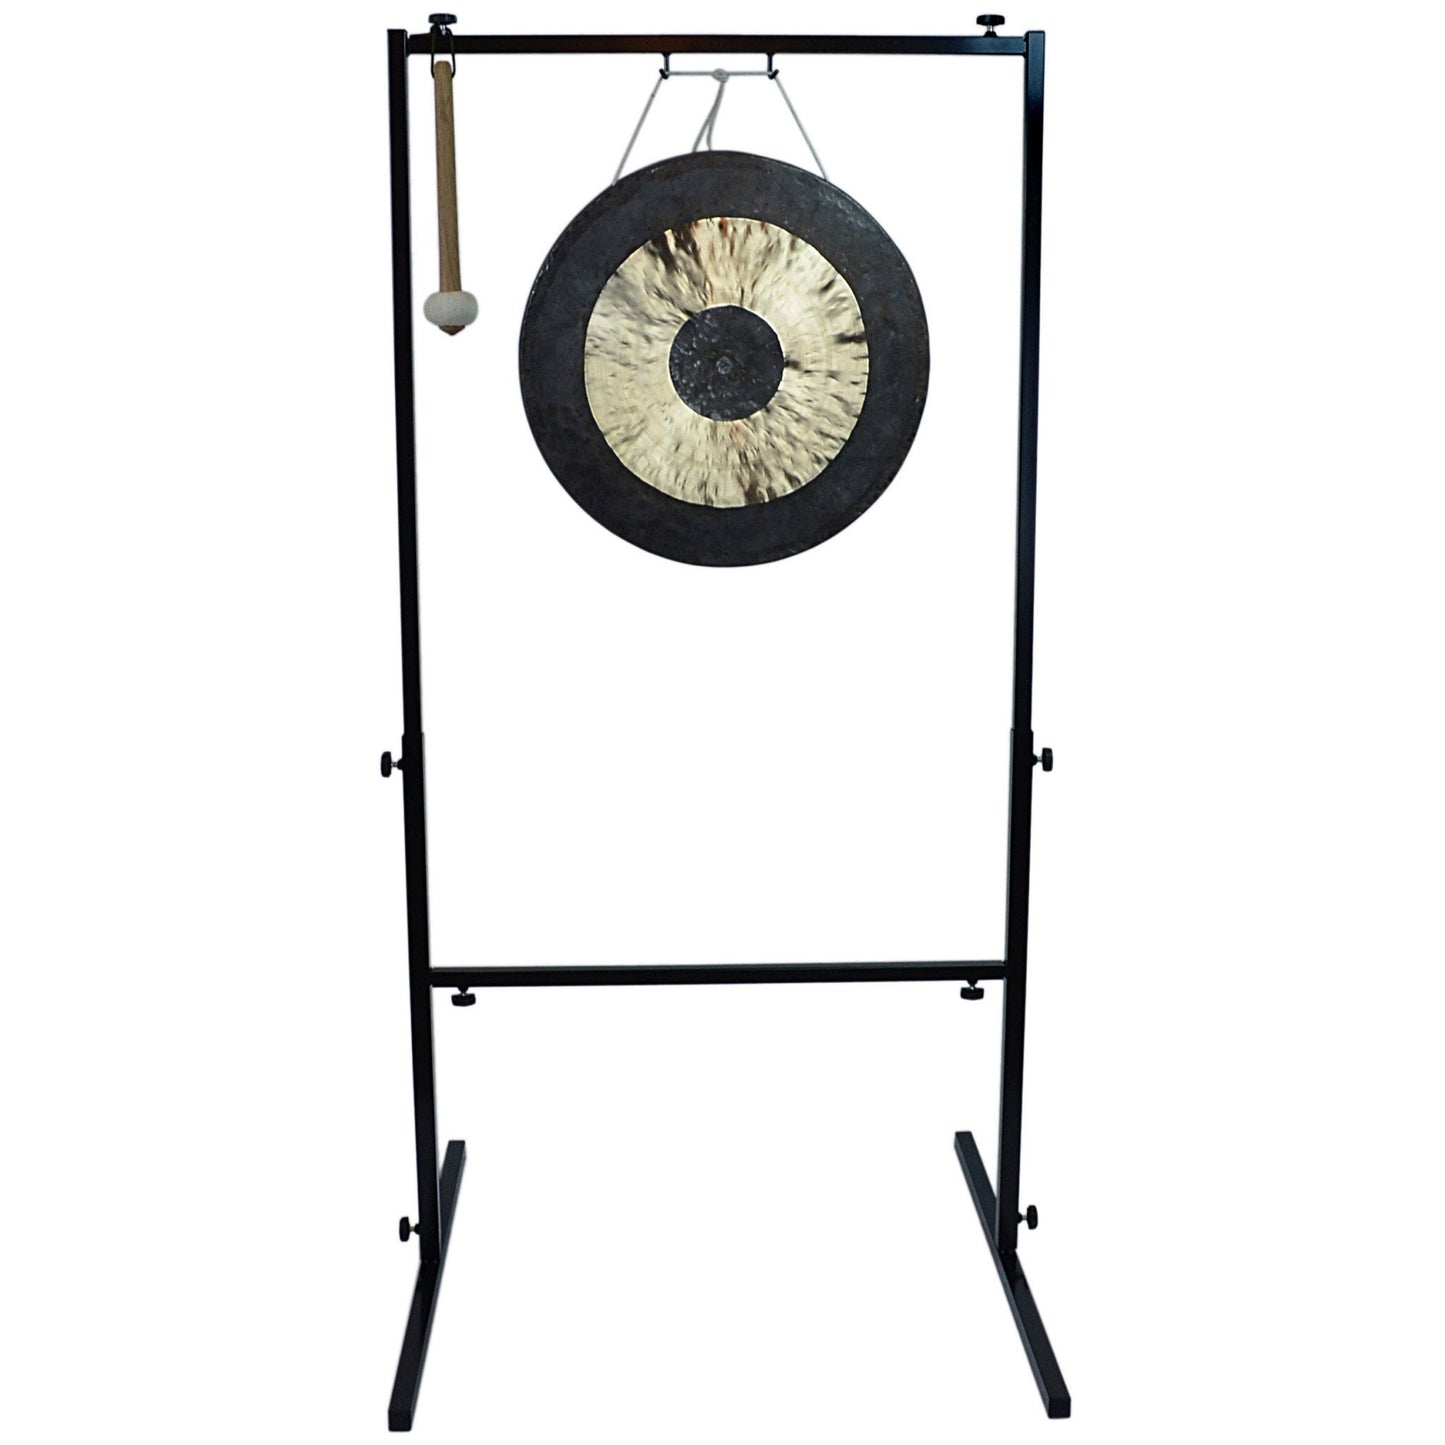 The Gong Shop Chinese Gongs with Stands 20" Chau Gong on Wuhan Gong Stand with Mallet